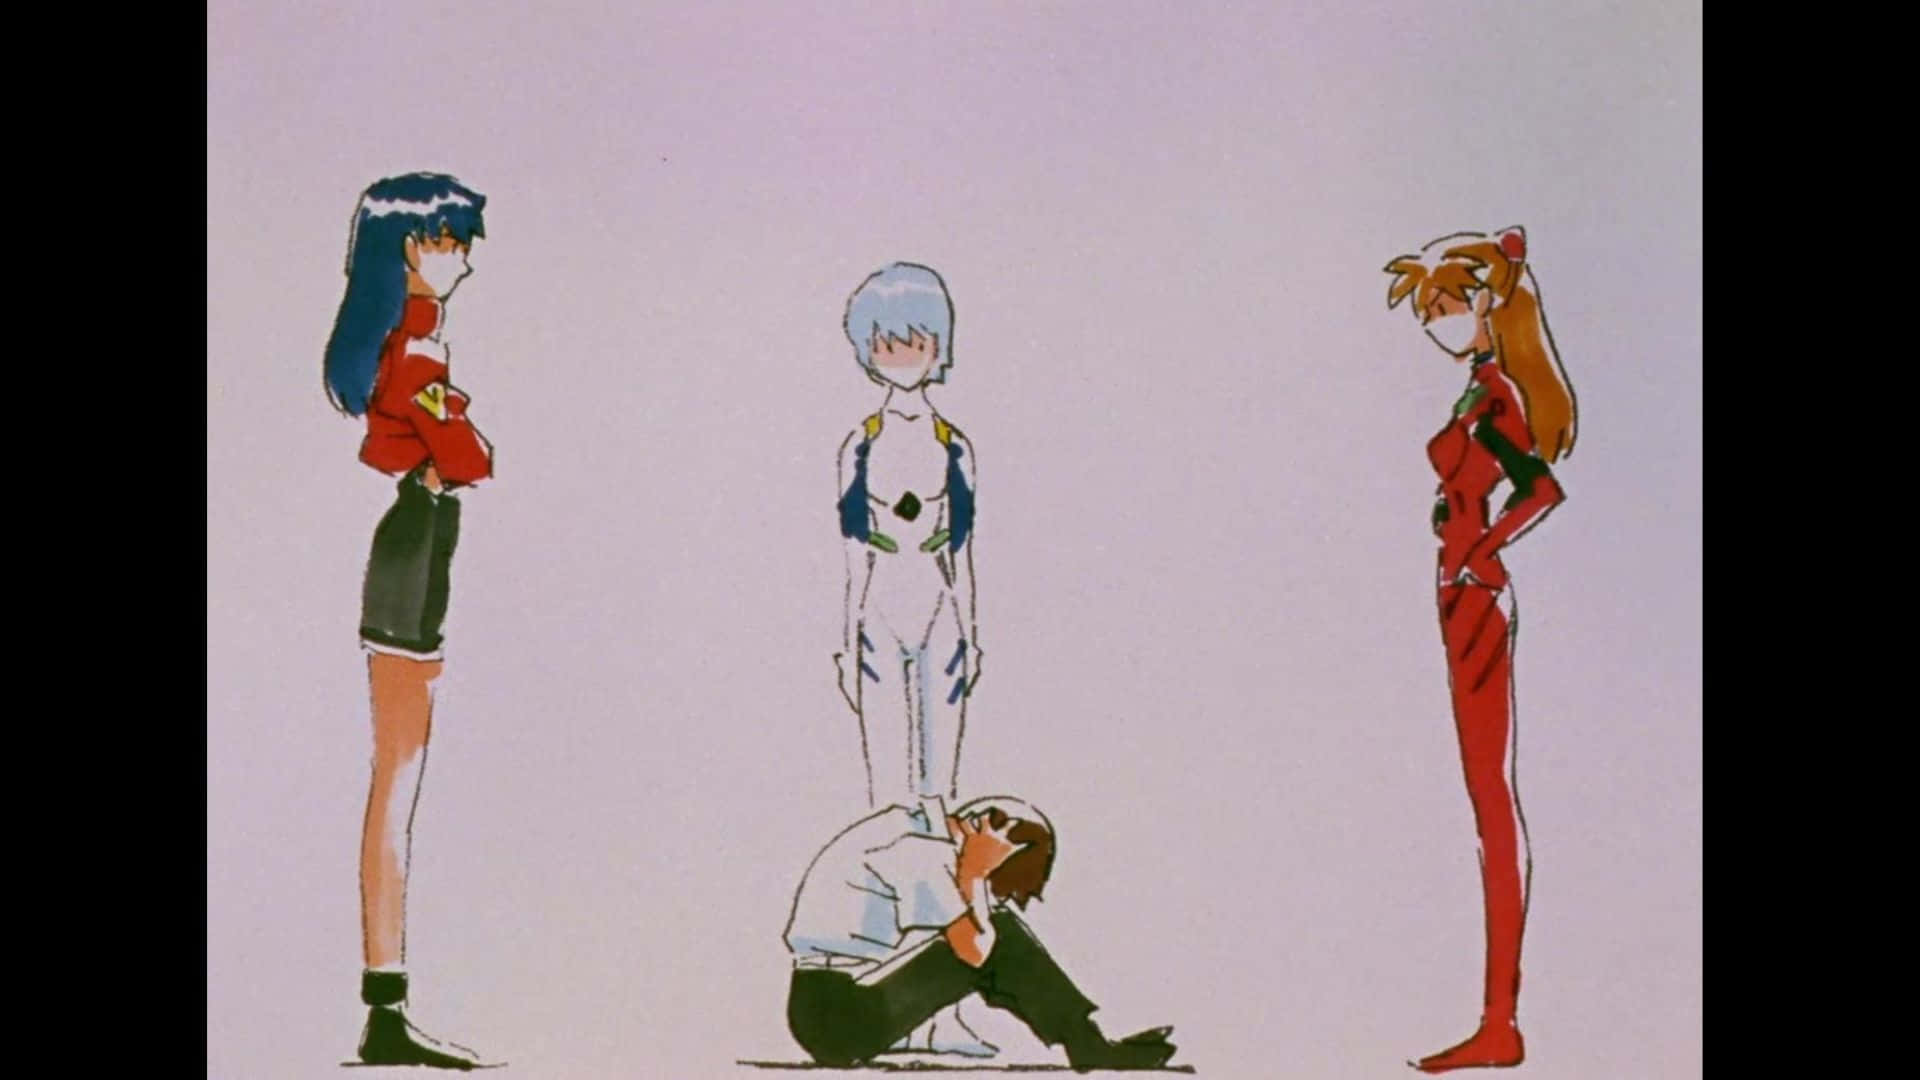 Adam Evangelion: The Ultimate Embodiment of Power and Mystery in the Neon Genesis Evangelion Universe Wallpaper